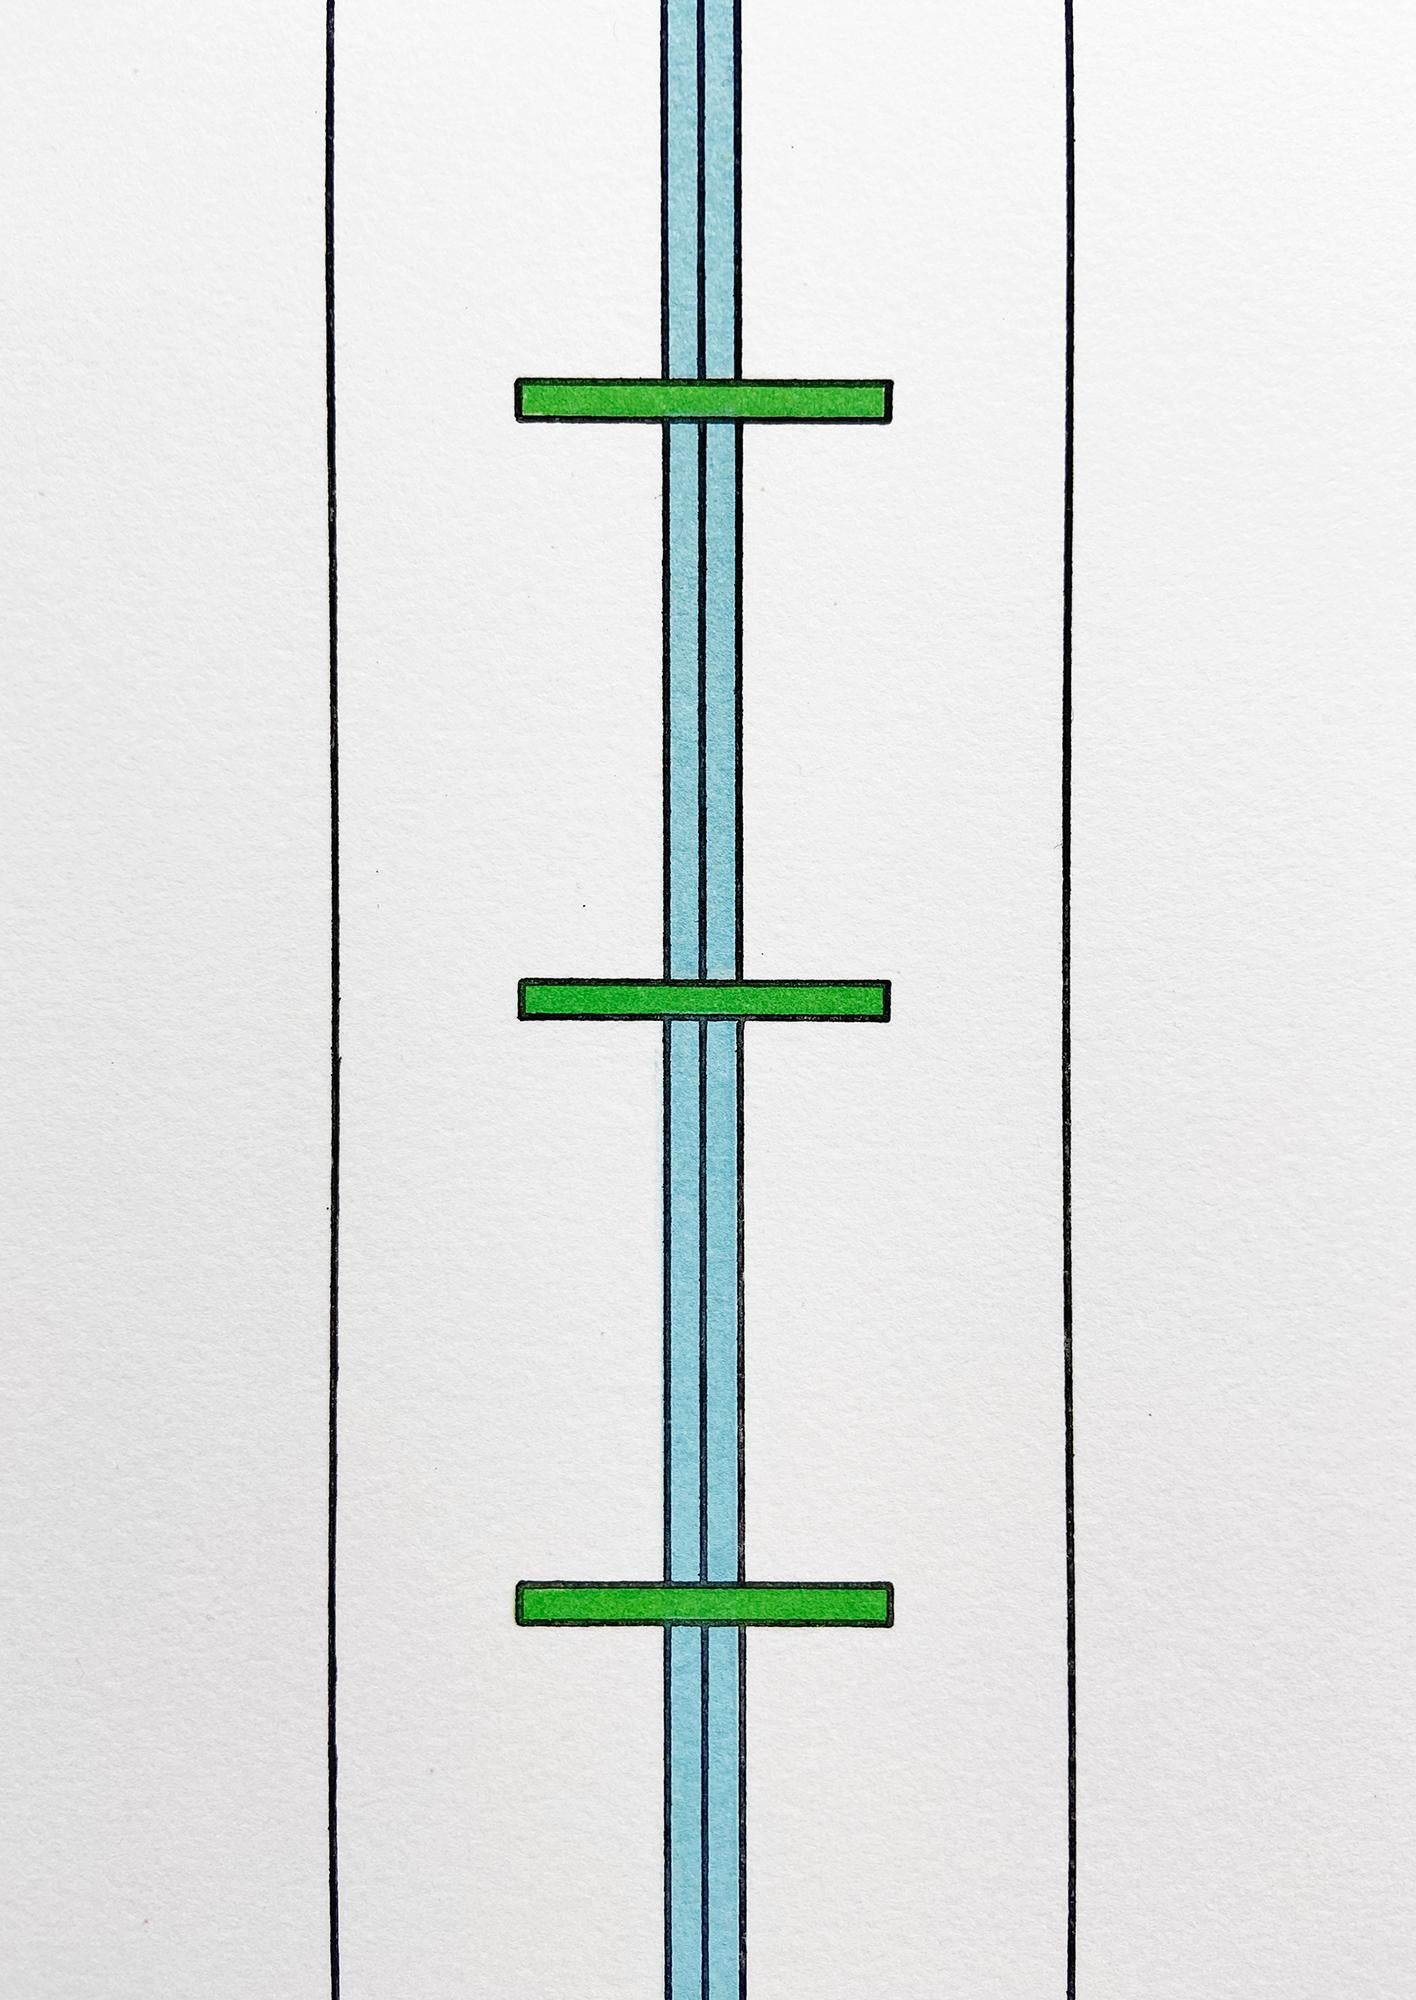 Dan Flavin, Untitled (Sheet 10 from Projects 1963-1995), Minimalism, Abstract 1